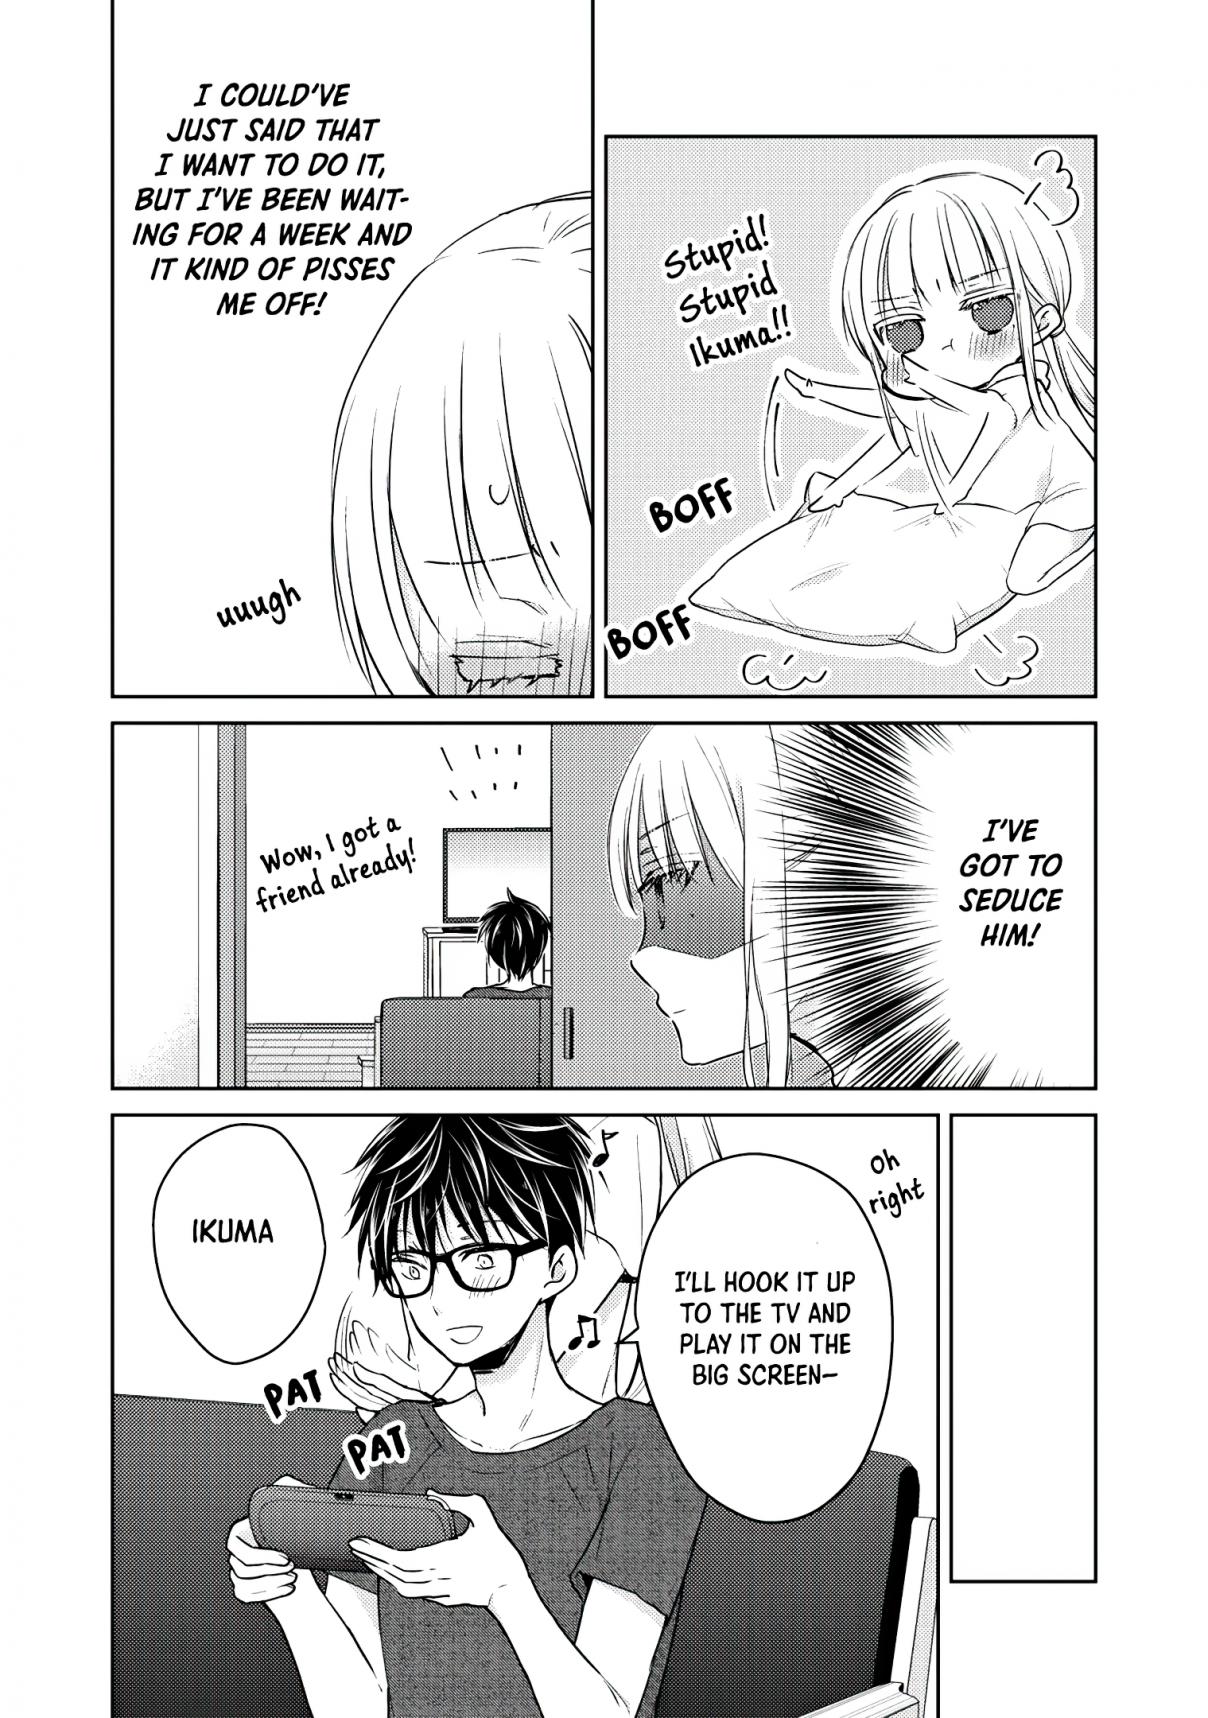 We May Be an Inexperienced Couple but... Vol. 5 Ch. 43 I Want It